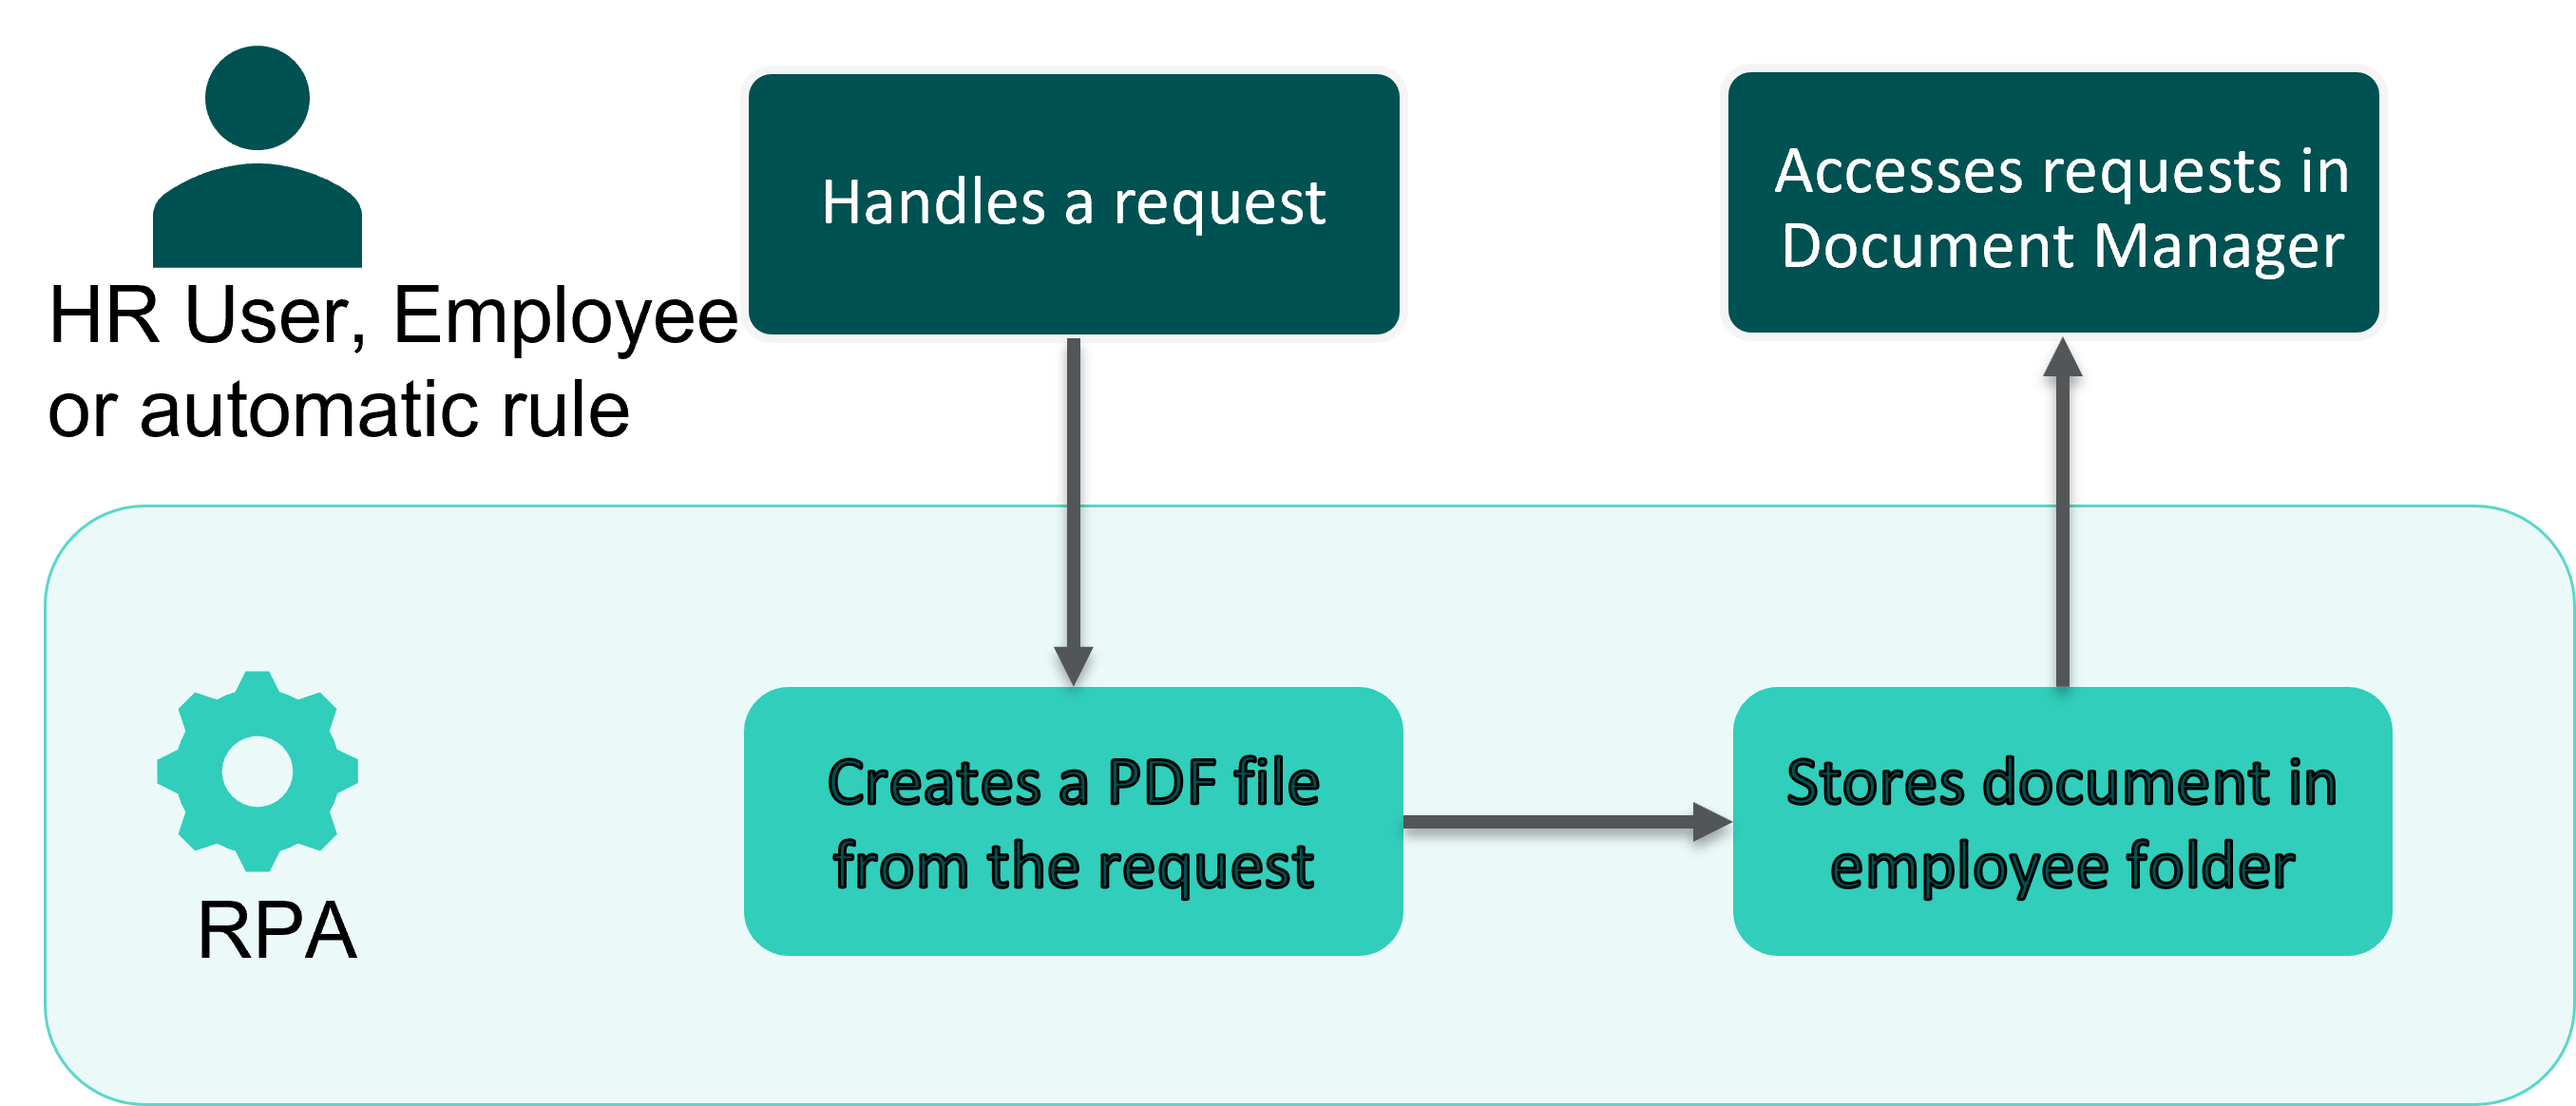 Workflow for RPA009